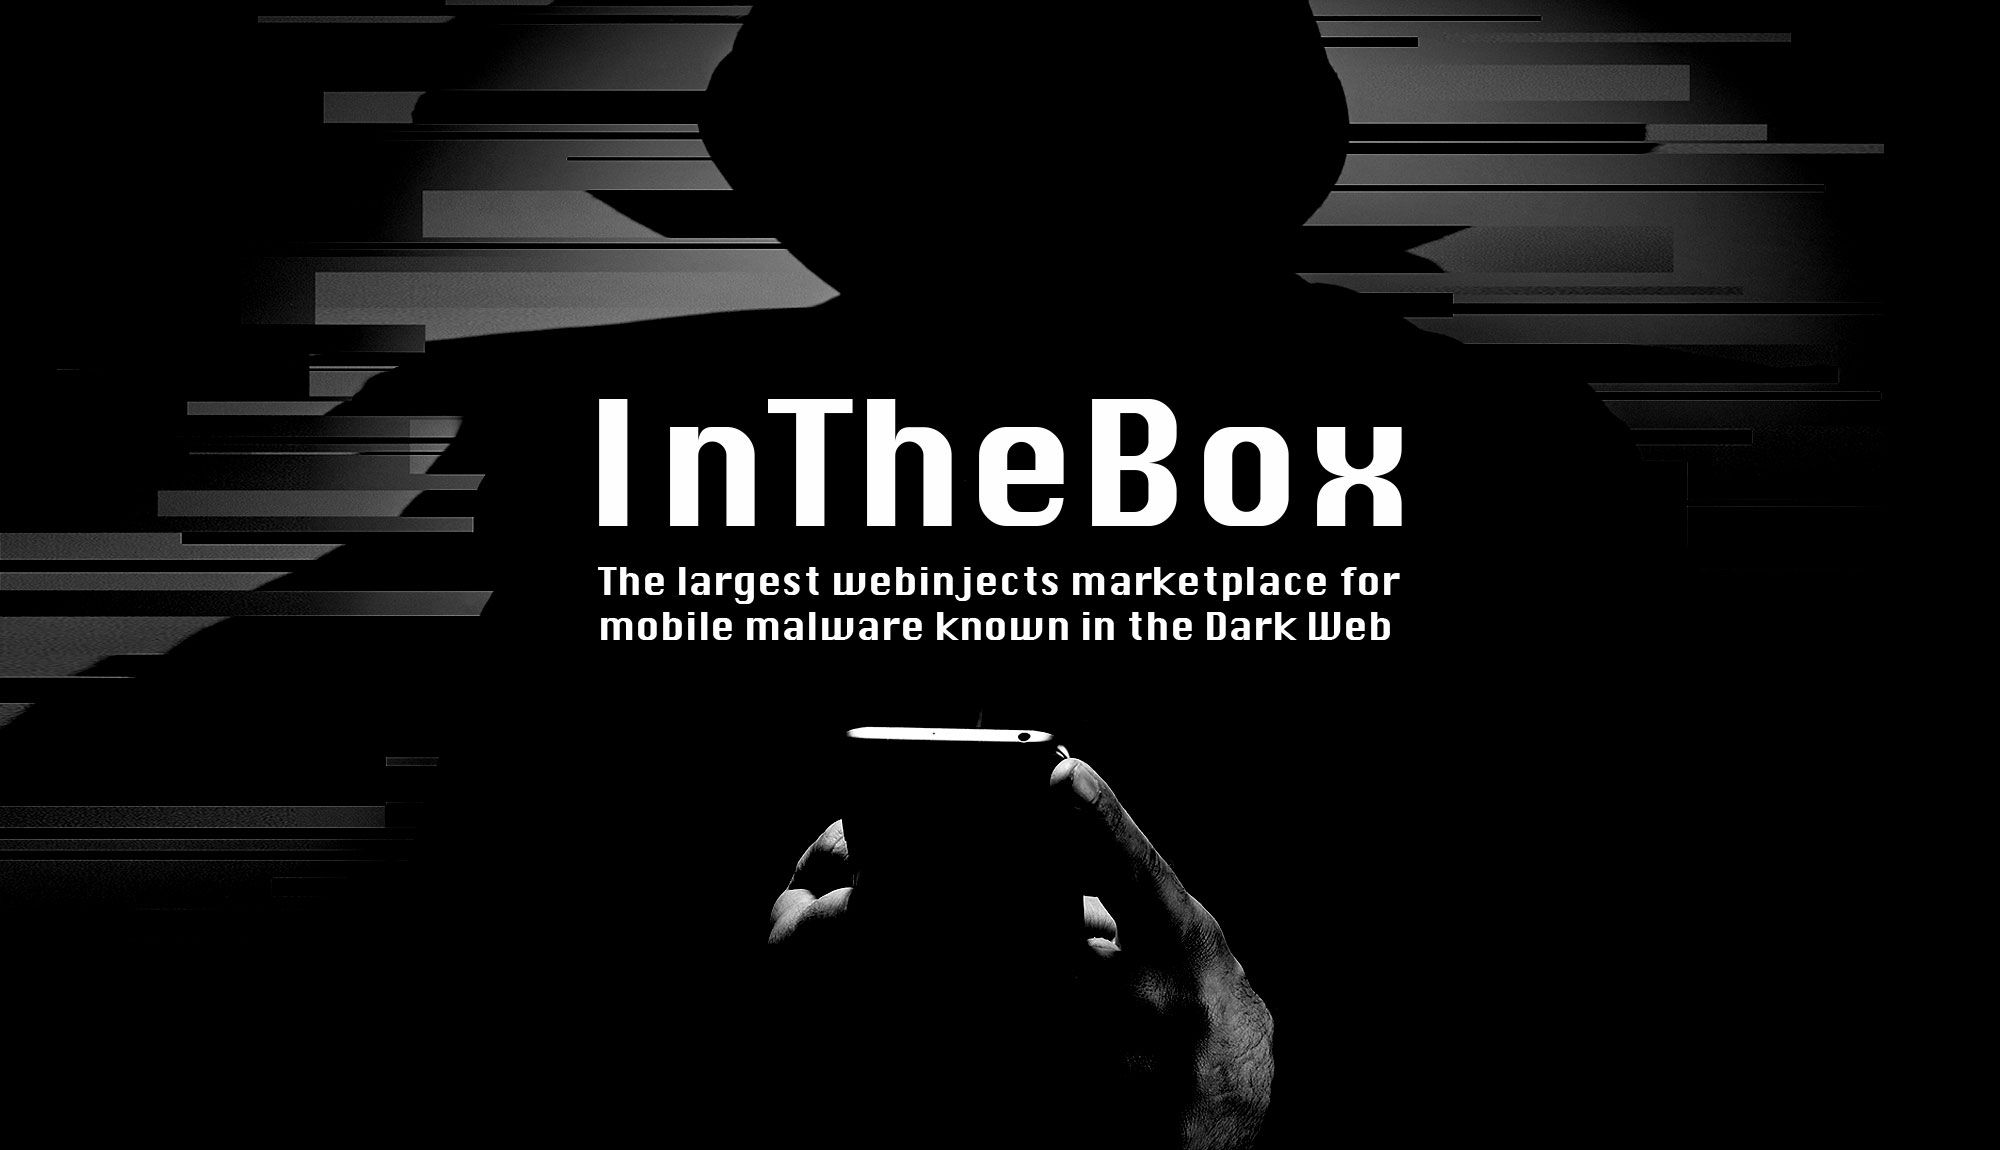 "In The Box" - Mobile Malware Webinjects Marketplace